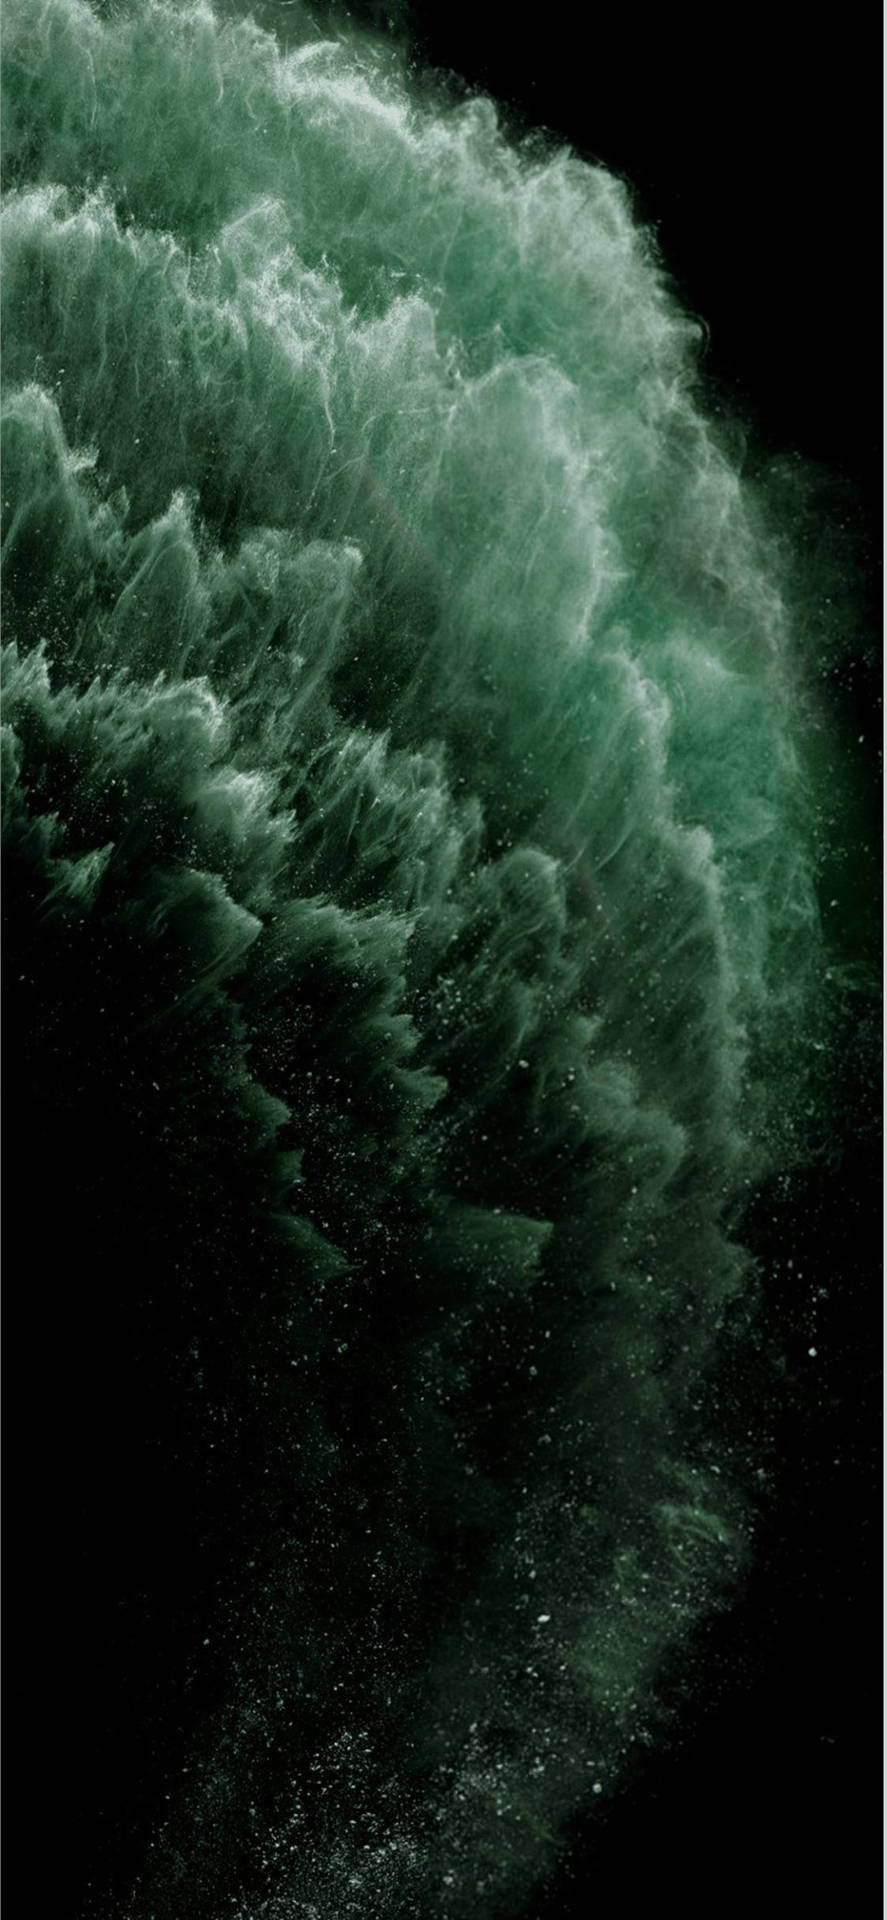 Get your hands on the latest Aesthetic Green iPhone Wallpaper